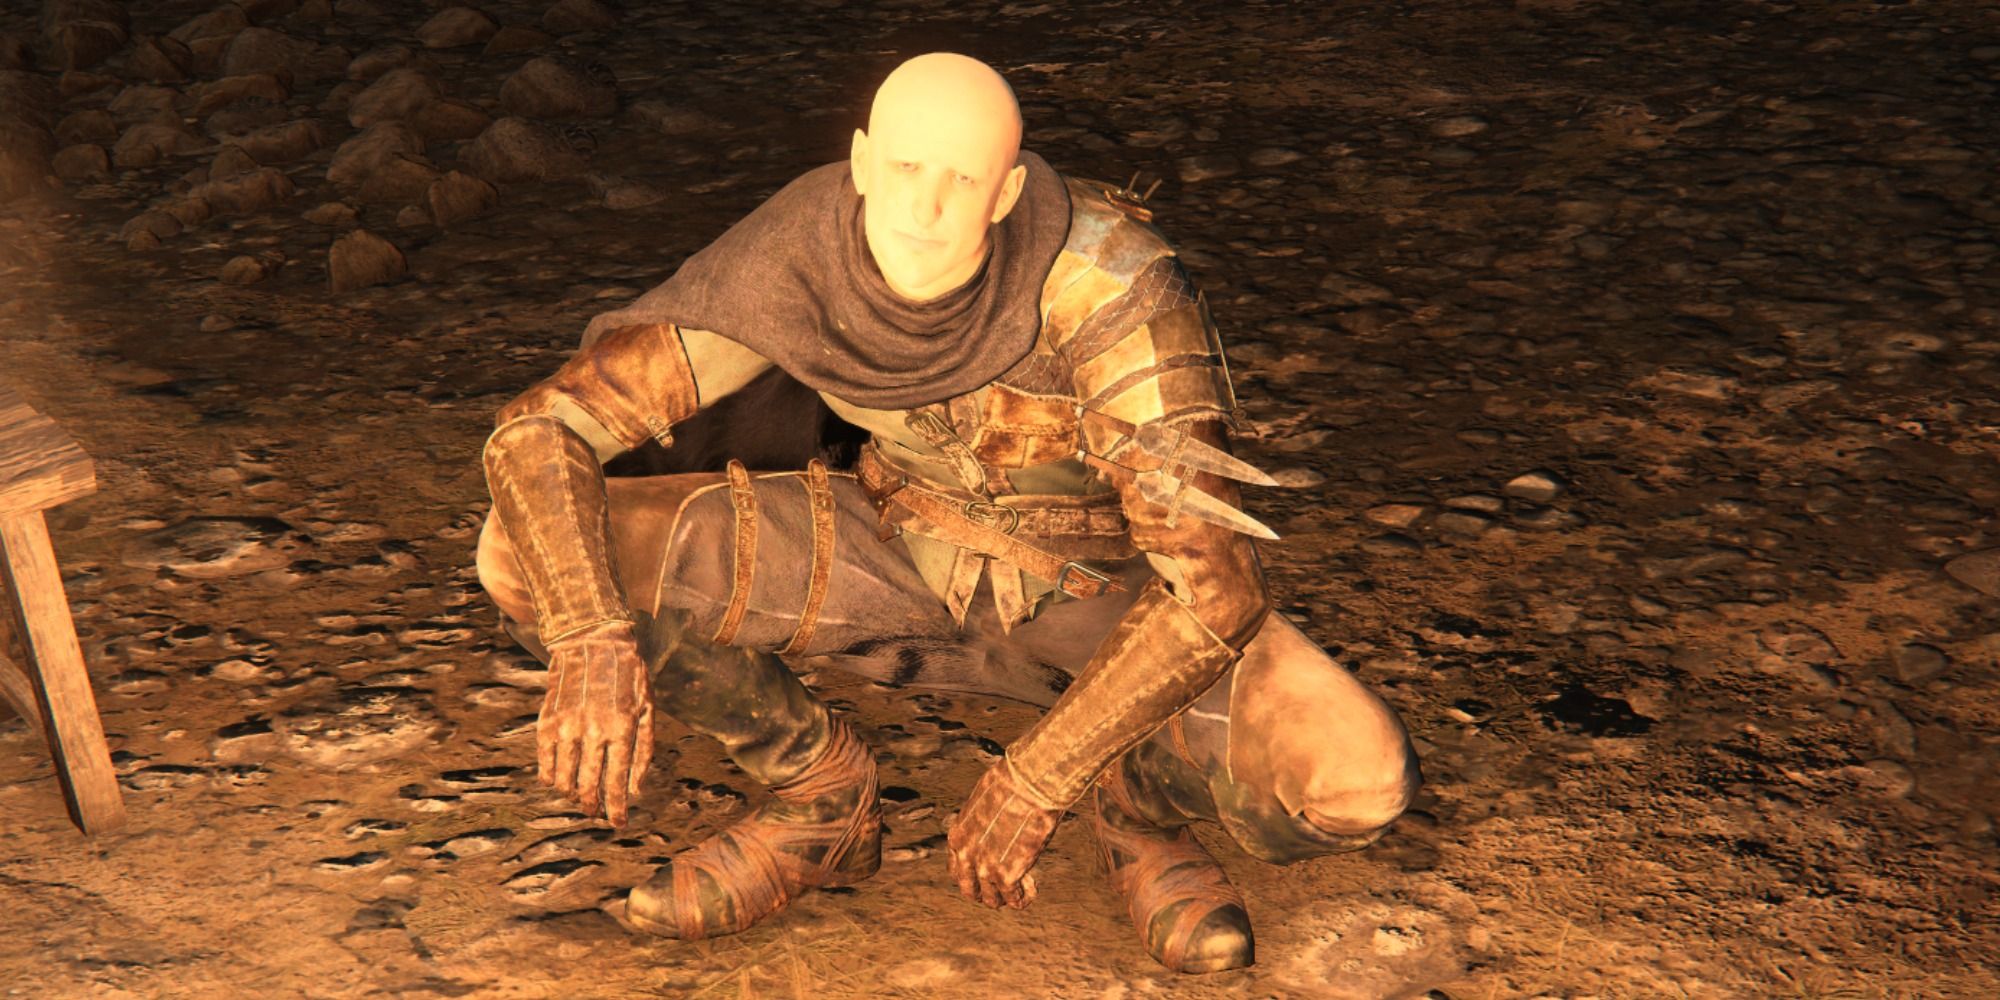 Patches squatting by a fire in Elden Ring.